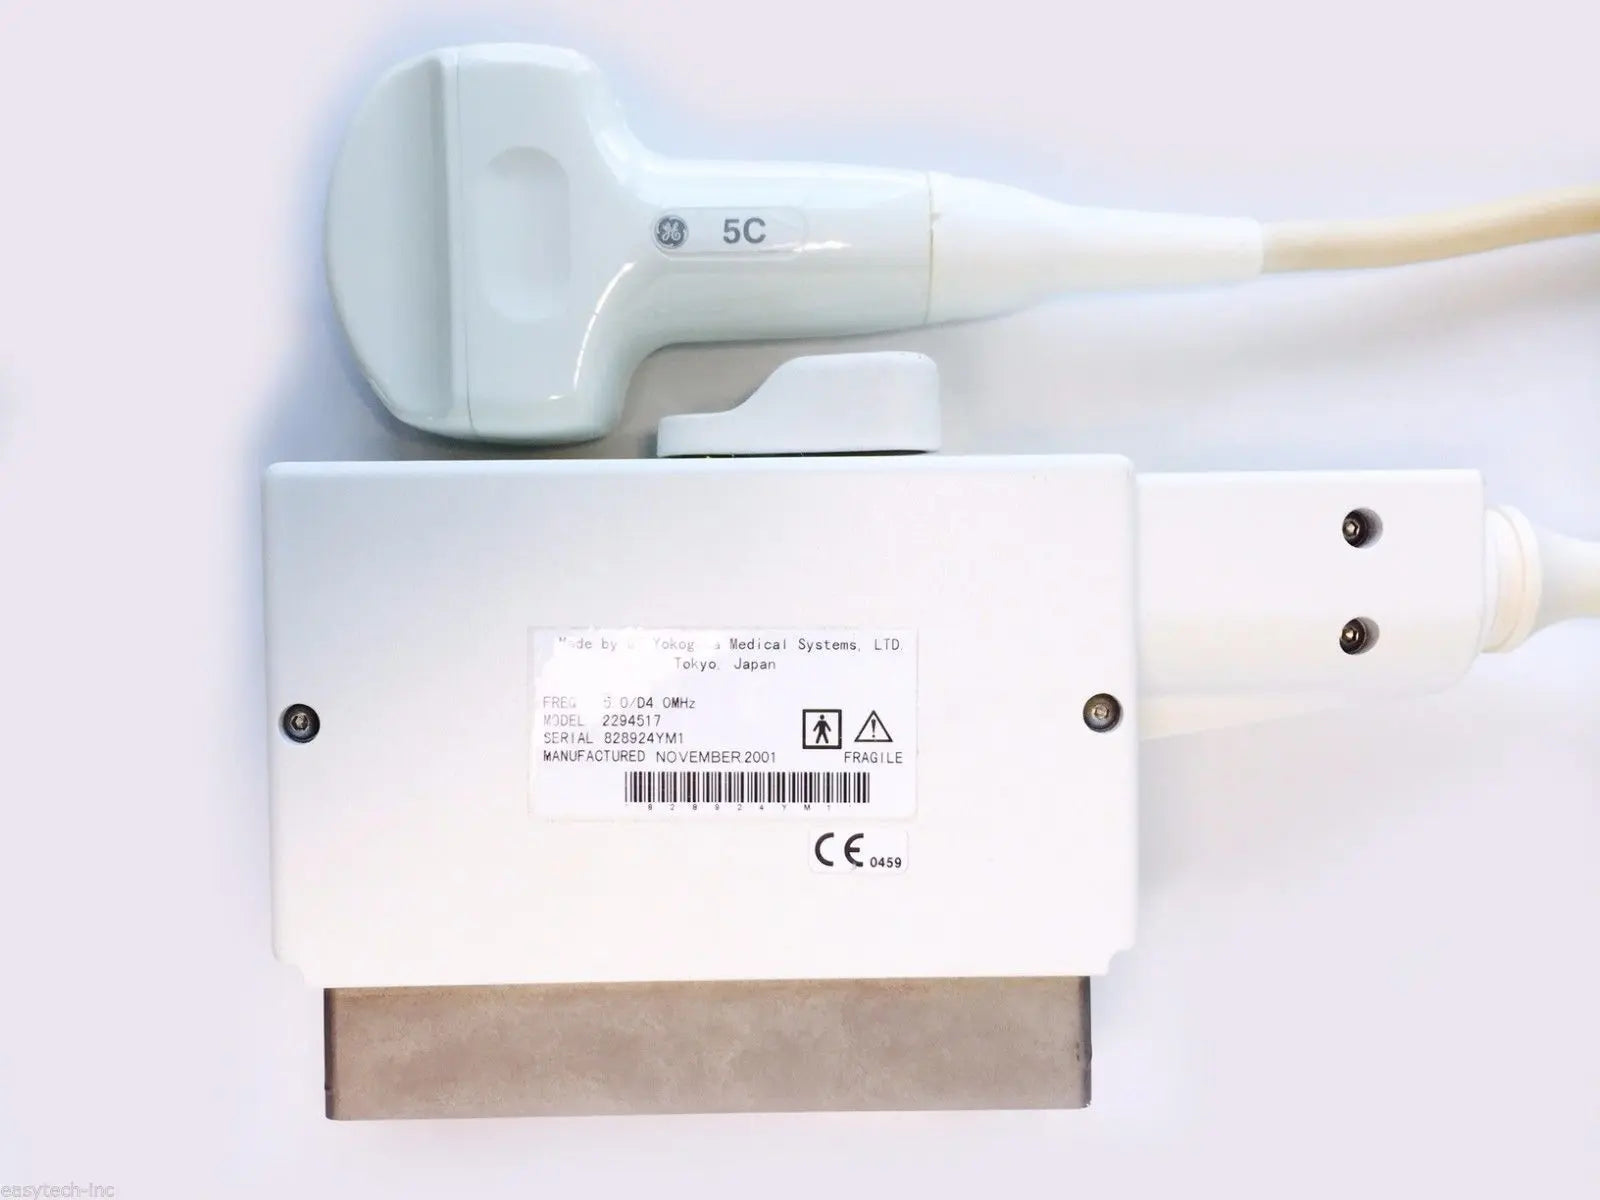 GE 5C Convex Array Ultrasound Transducer Probe for GE Logiq and Vivid series DIAGNOSTIC ULTRASOUND MACHINES FOR SALE